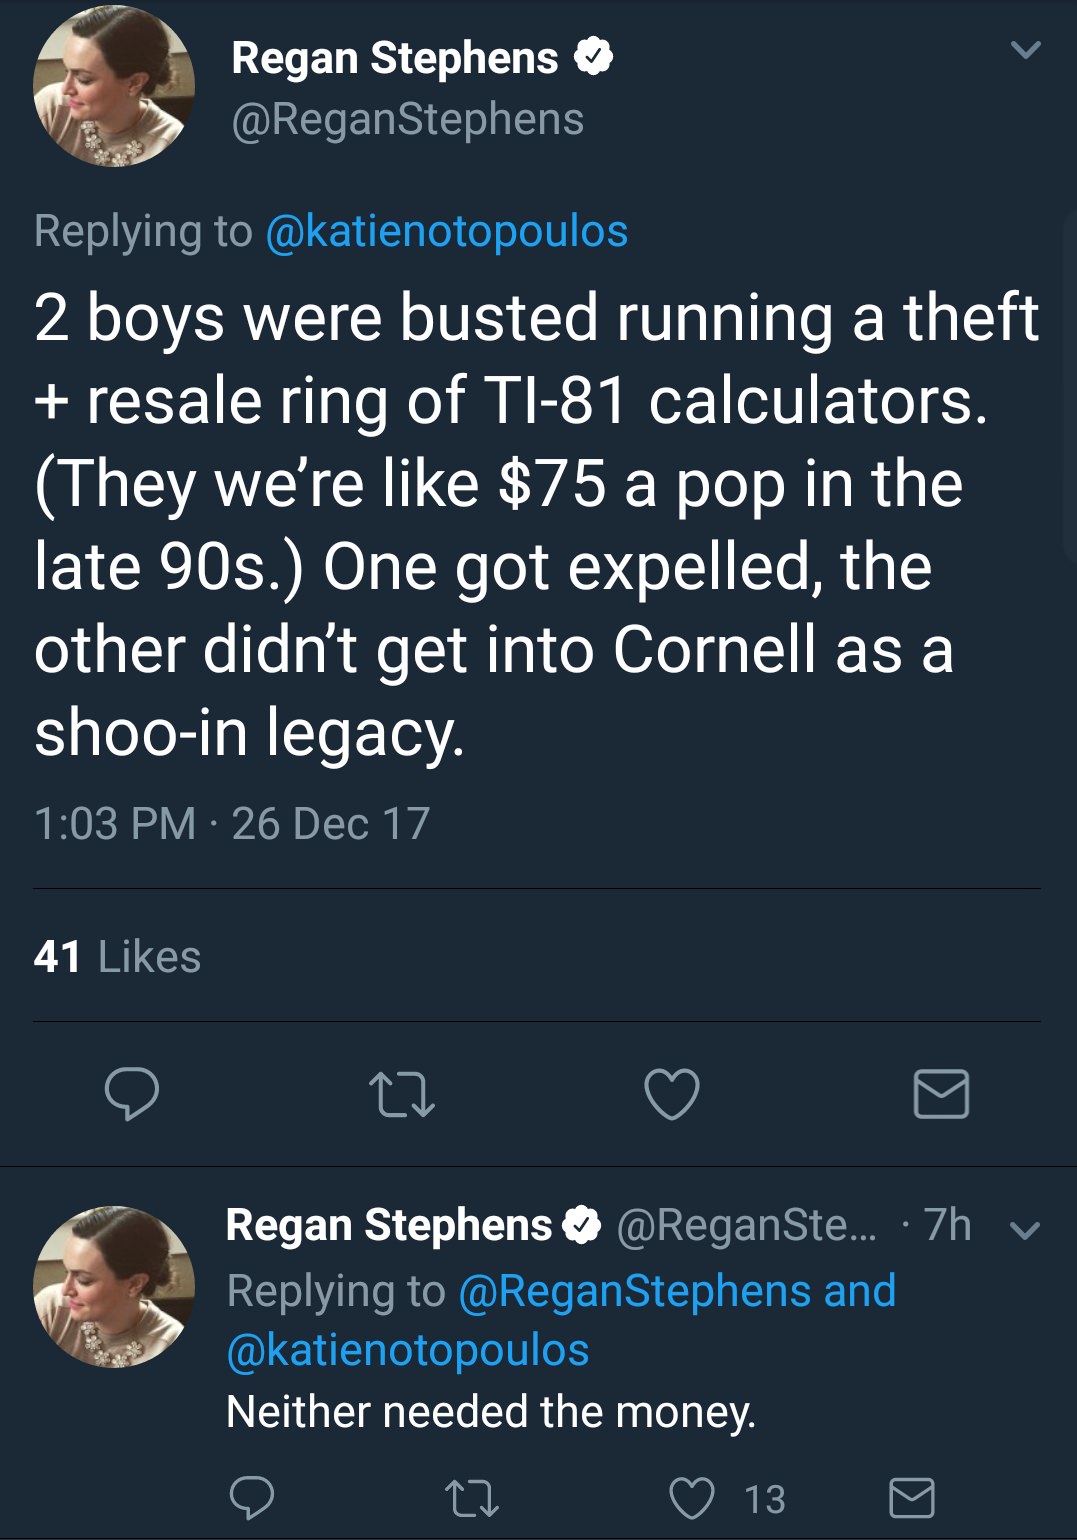 screenshot - Regan Stephens 2 boys were busted running a theft resale ring of Tl81 calculators. They we're $75 a pop in the late 90s. One got expelled, the other didn't get into Cornell as a shooin legacy. 26 Dec 17 41 Regan Stephens ... 7h v and Neither 